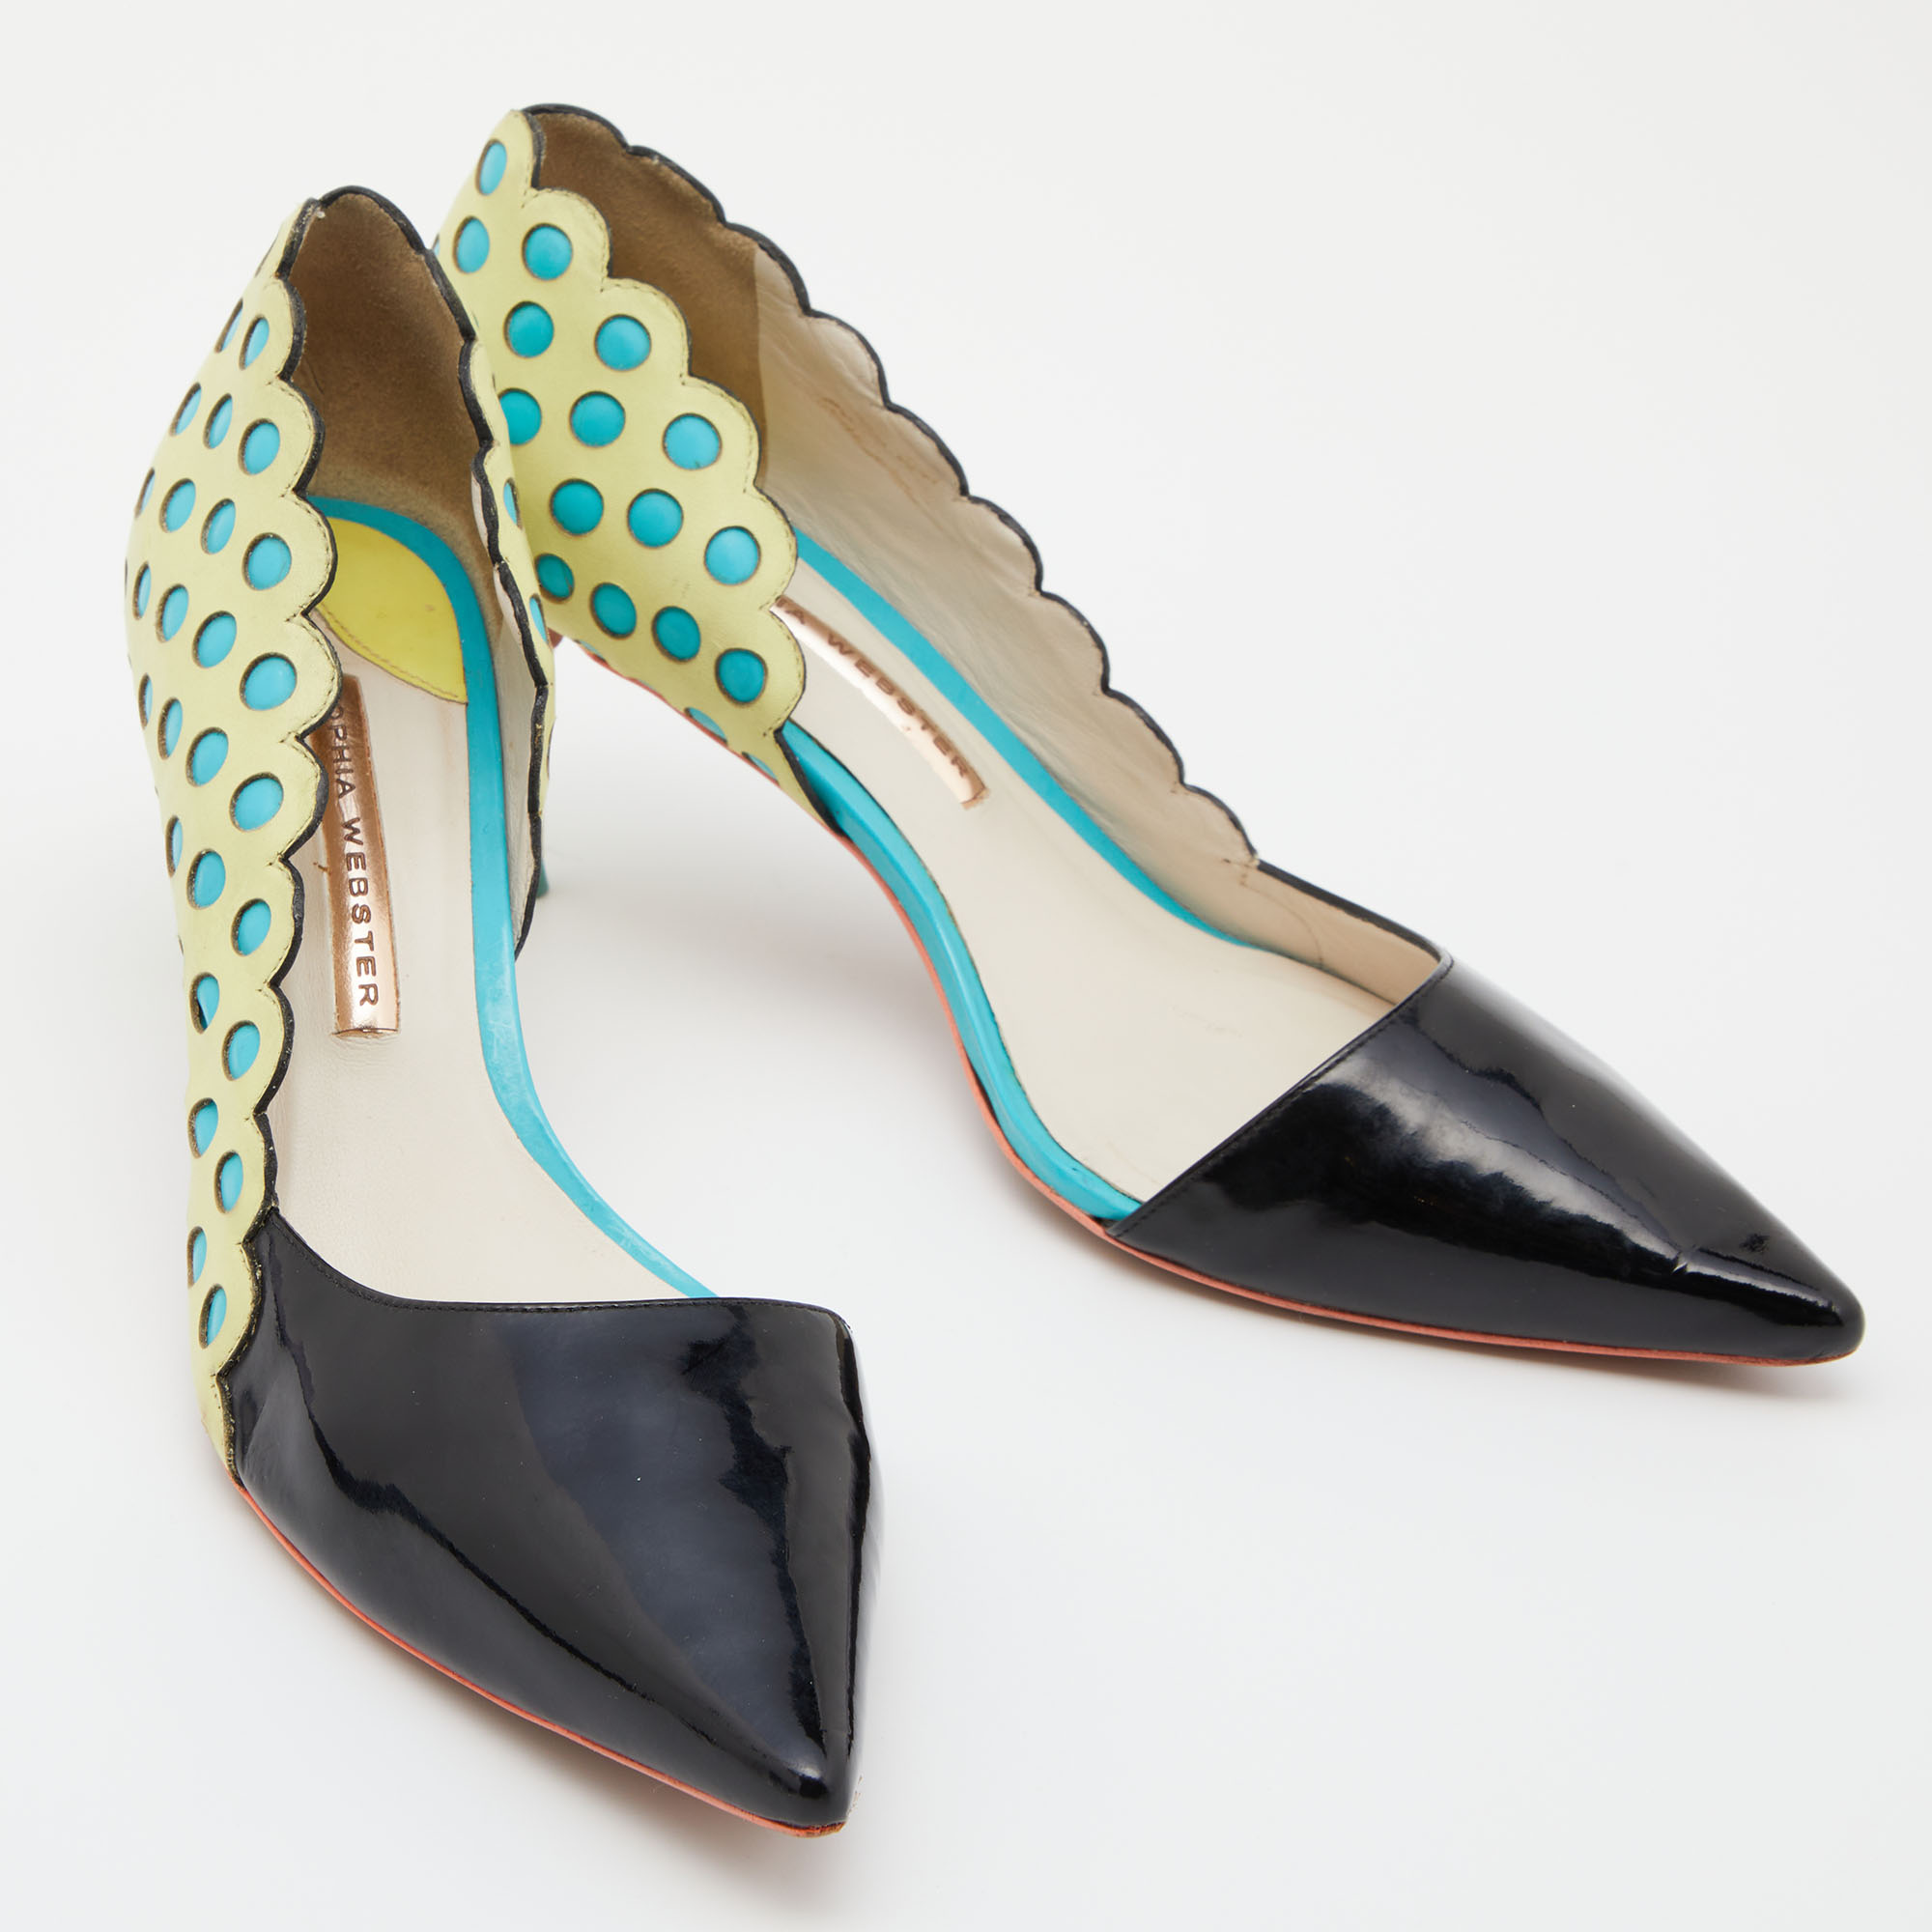 Sophia Webster Multicolour Patent And Leather D'orsay Pumps Size 39